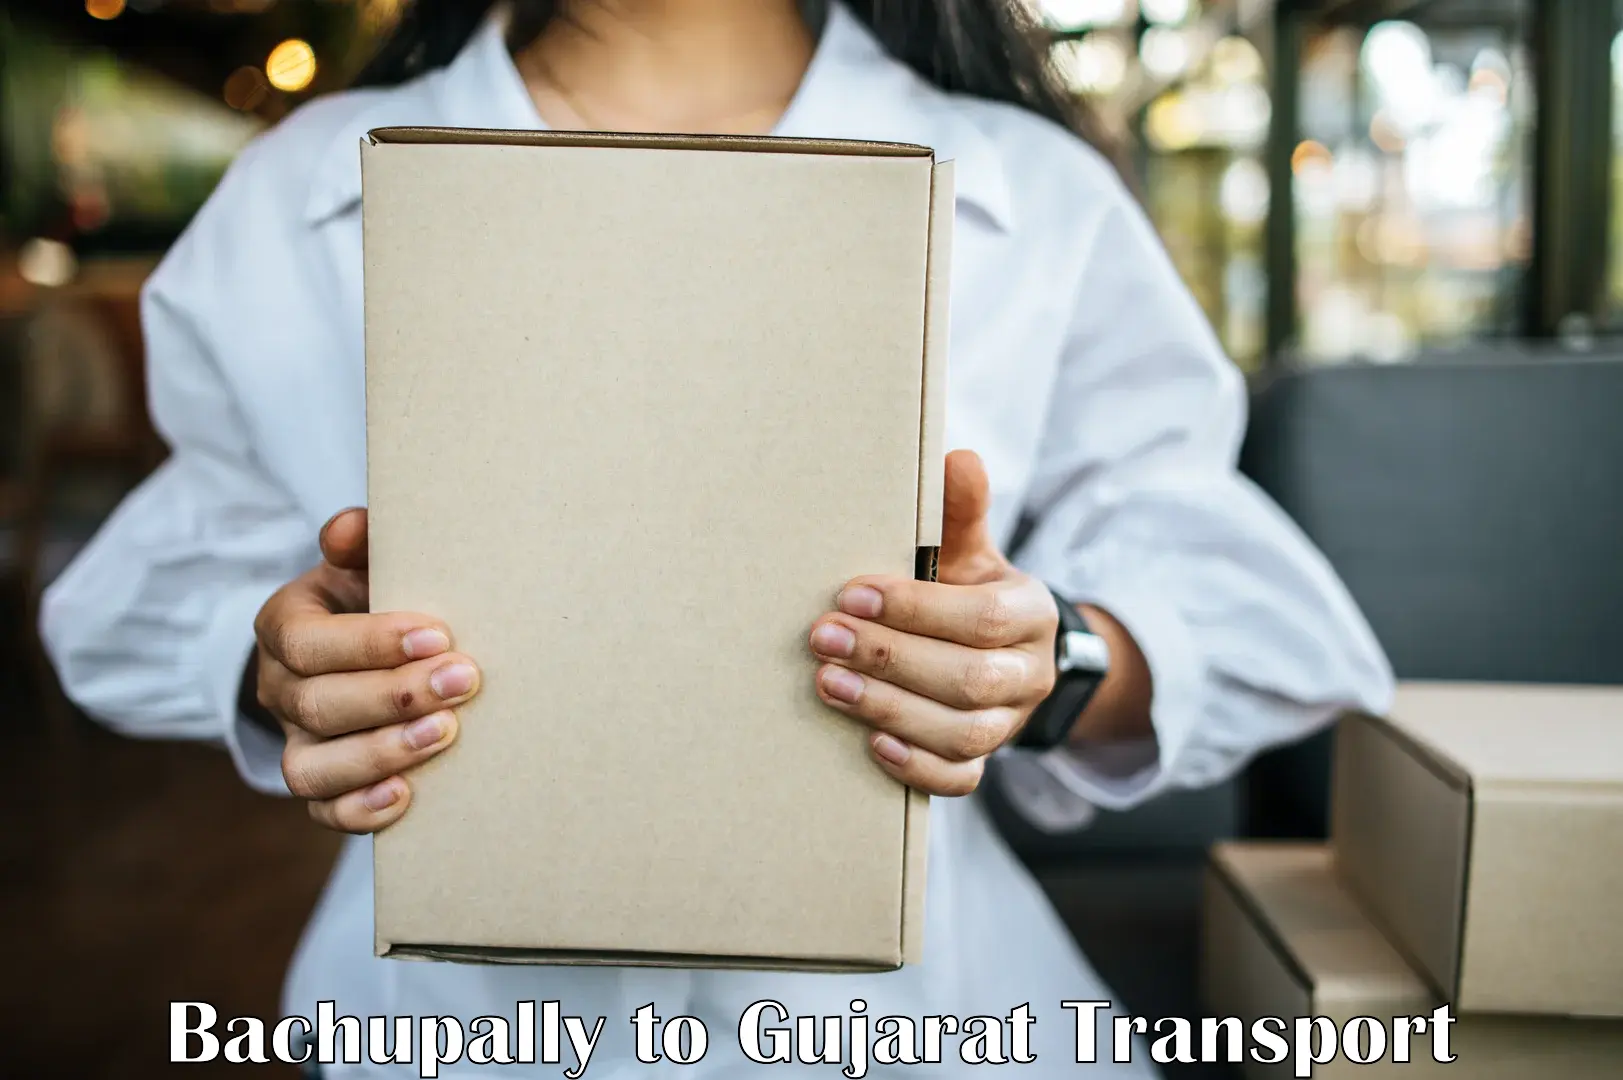 Express transport services in Bachupally to Gujarat